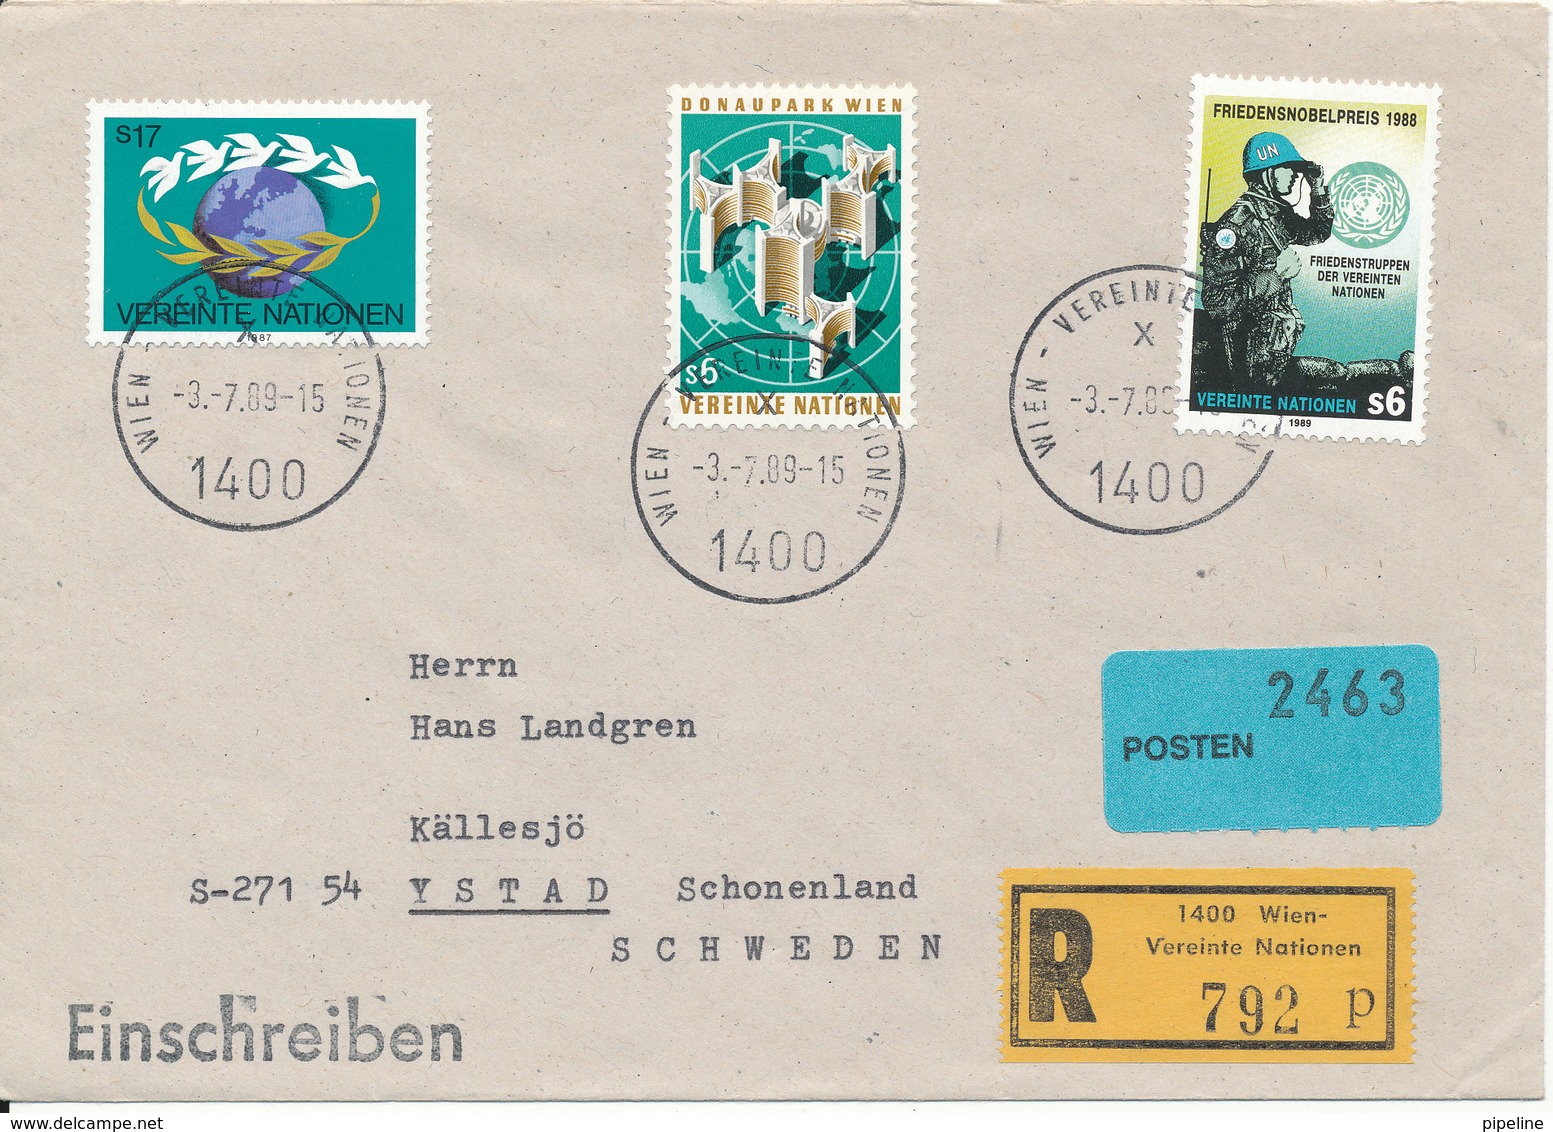 Austria UN Vienna Registered Cover Sent To Sweden 3-7-1989 - Covers & Documents